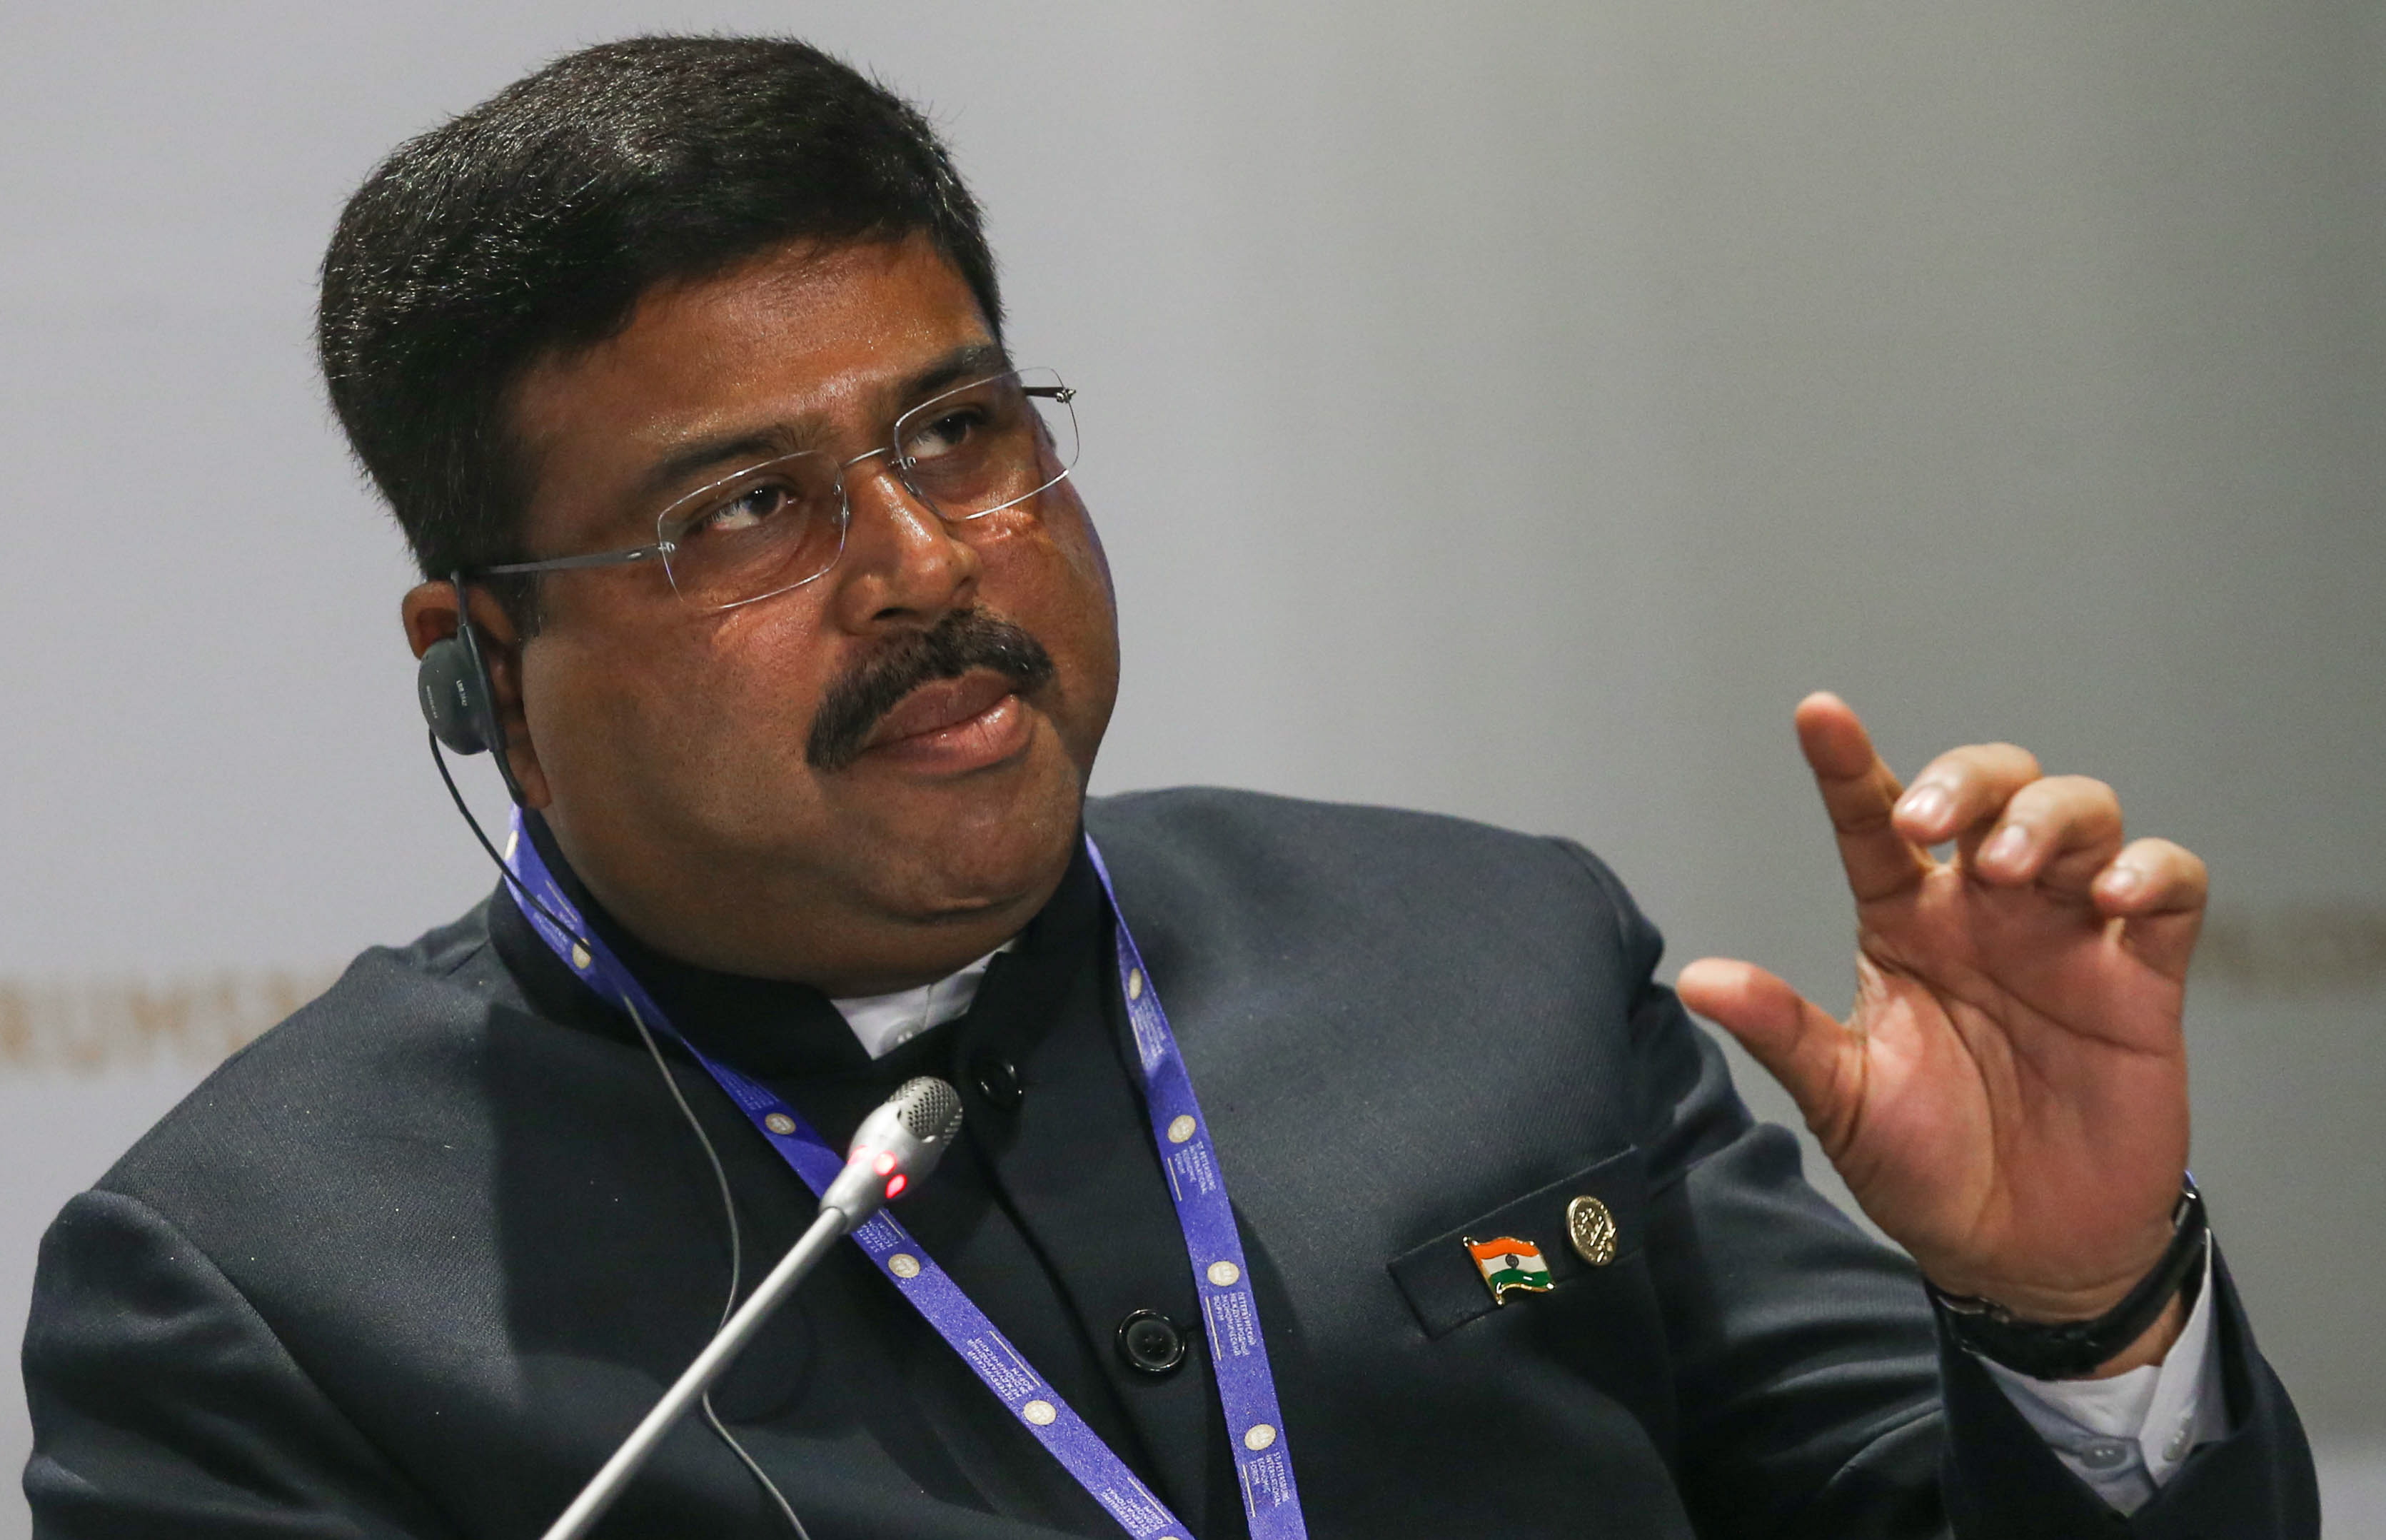 Dharmendra Pradhan, Indian Minister for Oil and Natural Gas.